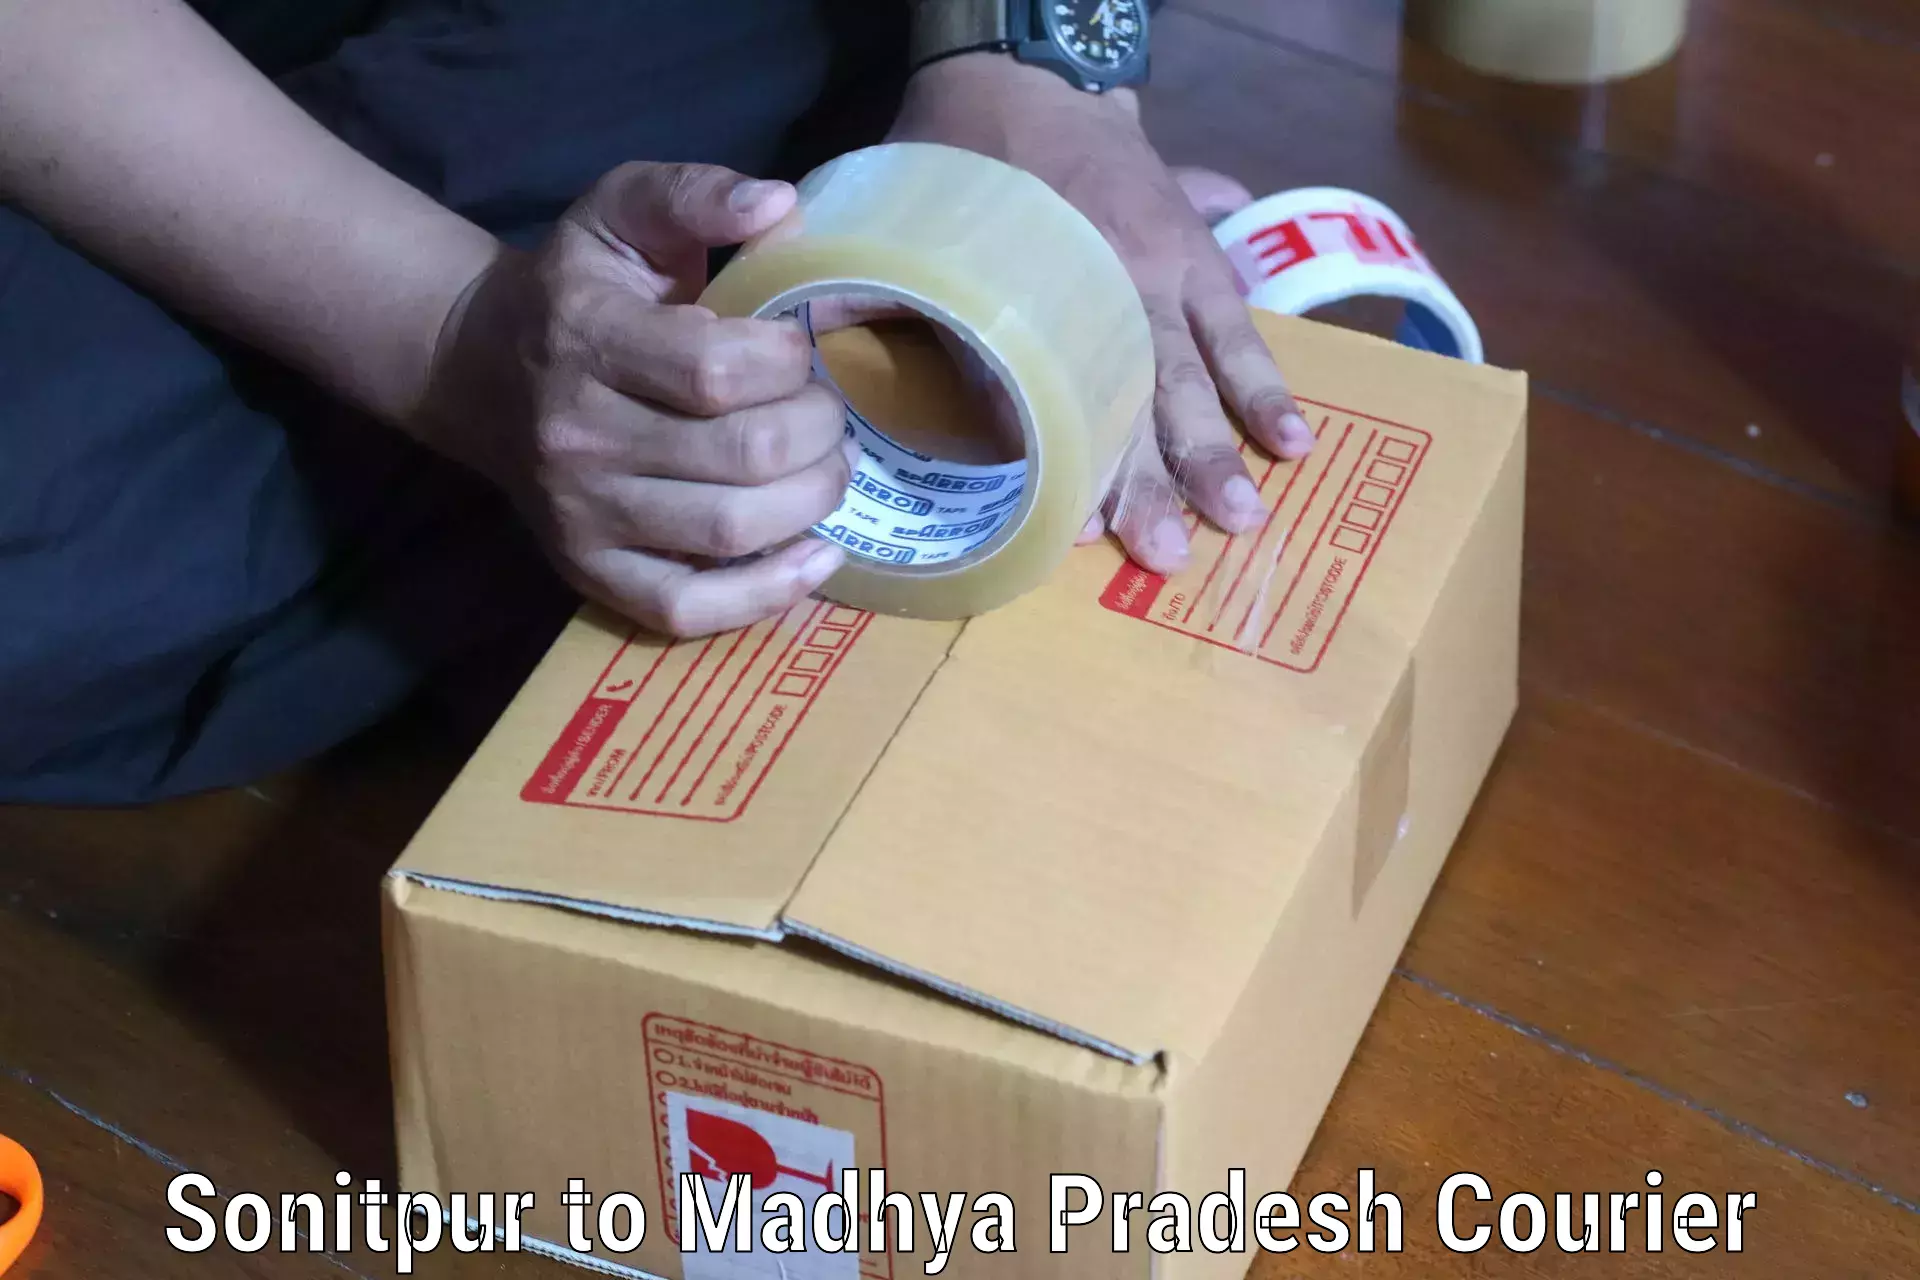 Professional courier handling Sonitpur to Chapda